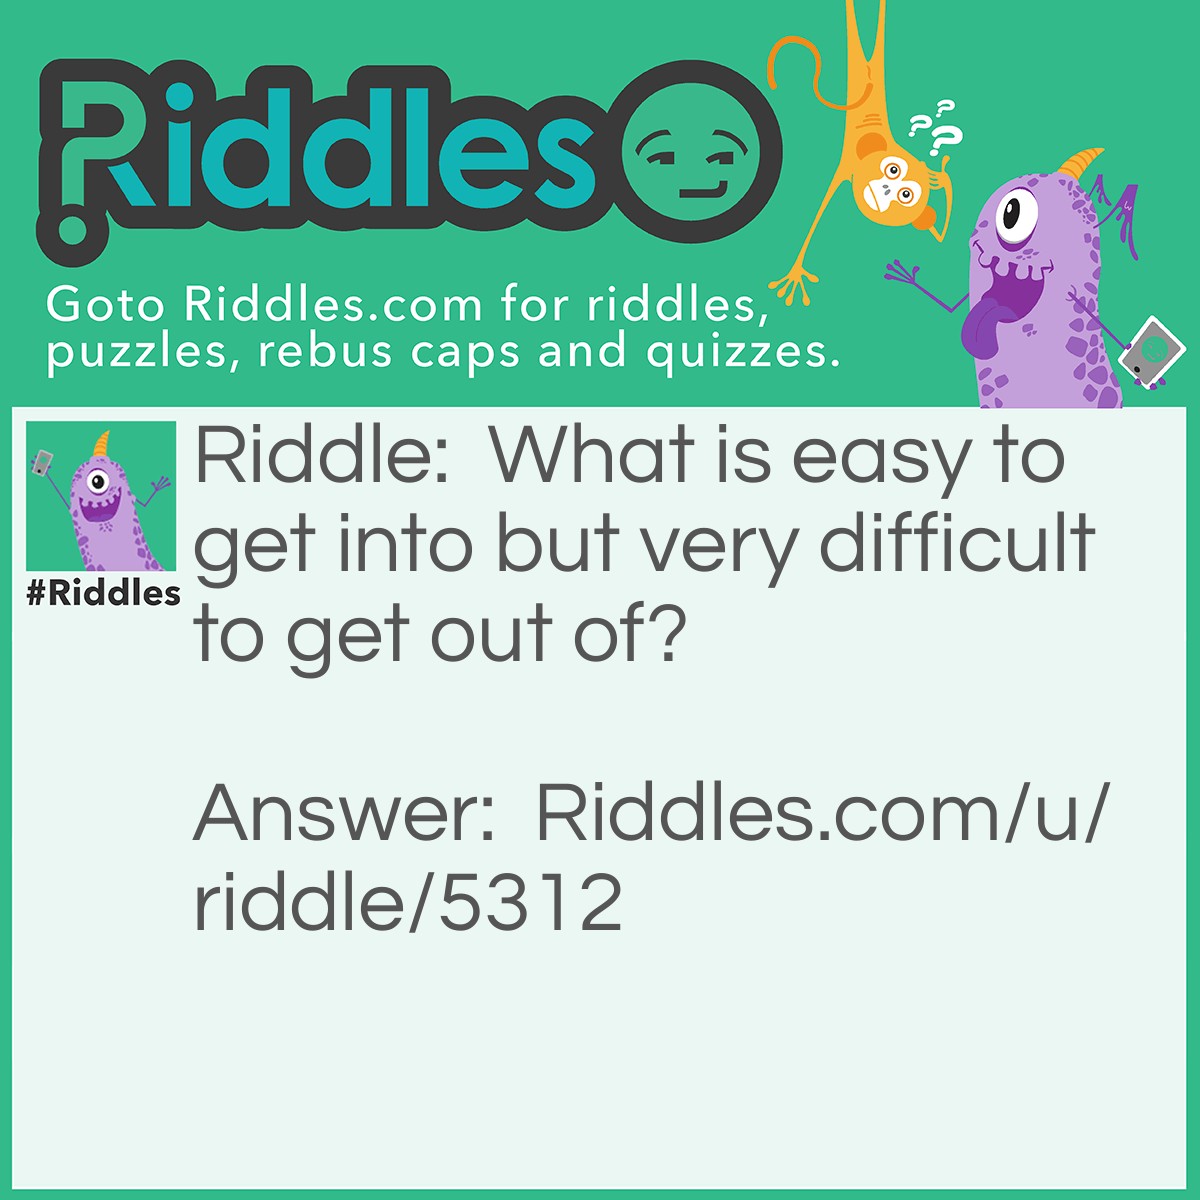 Riddle: What is easy to get into but very difficult to get out of? Answer: Trouble.